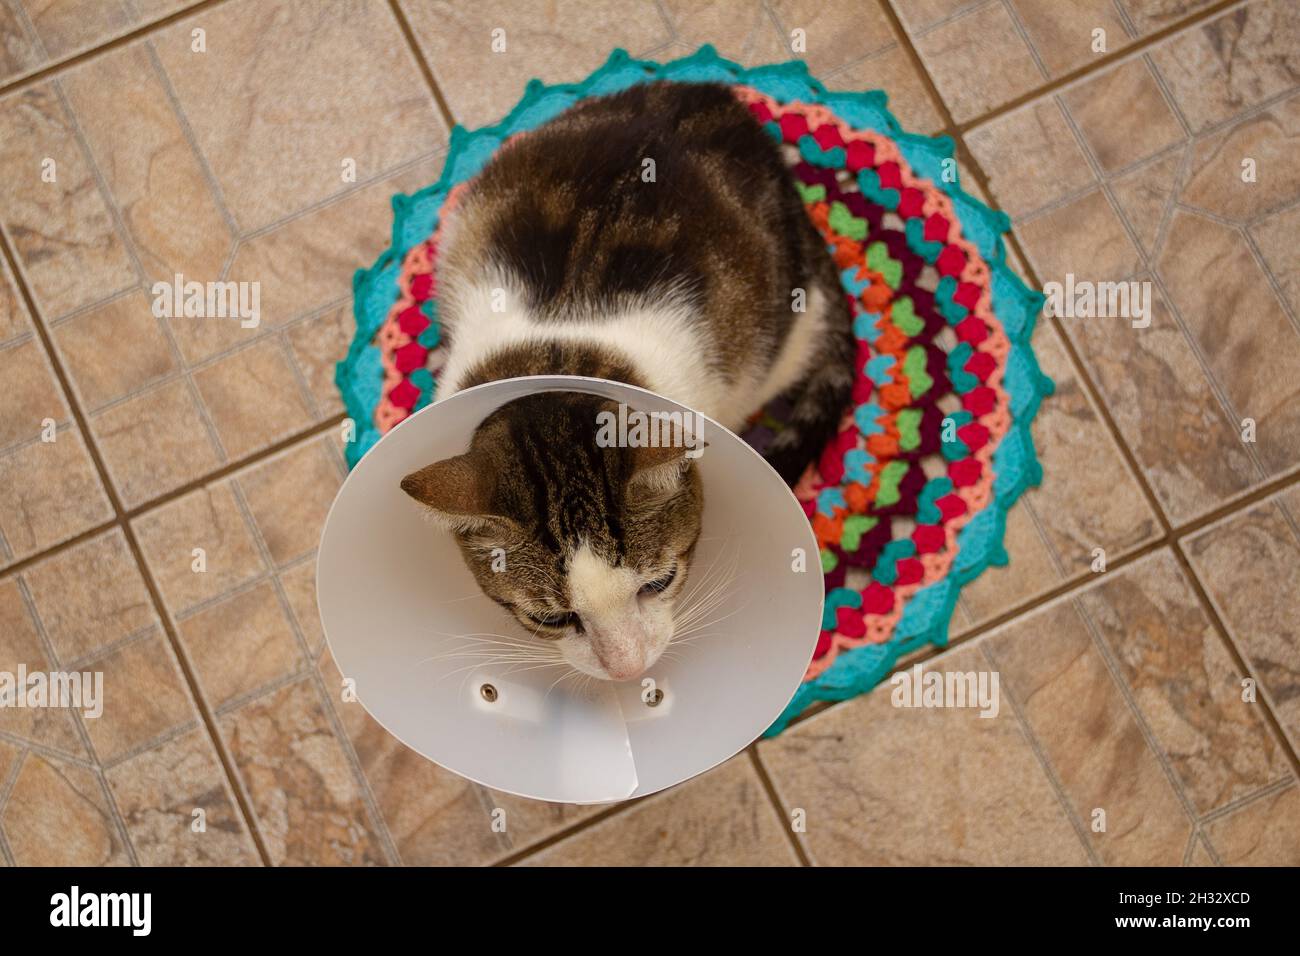 A short-haired tabby, on a colorful crocheted rug, undergoing treatment, wearing an Elizabethan collar around its neck. Stock Photo